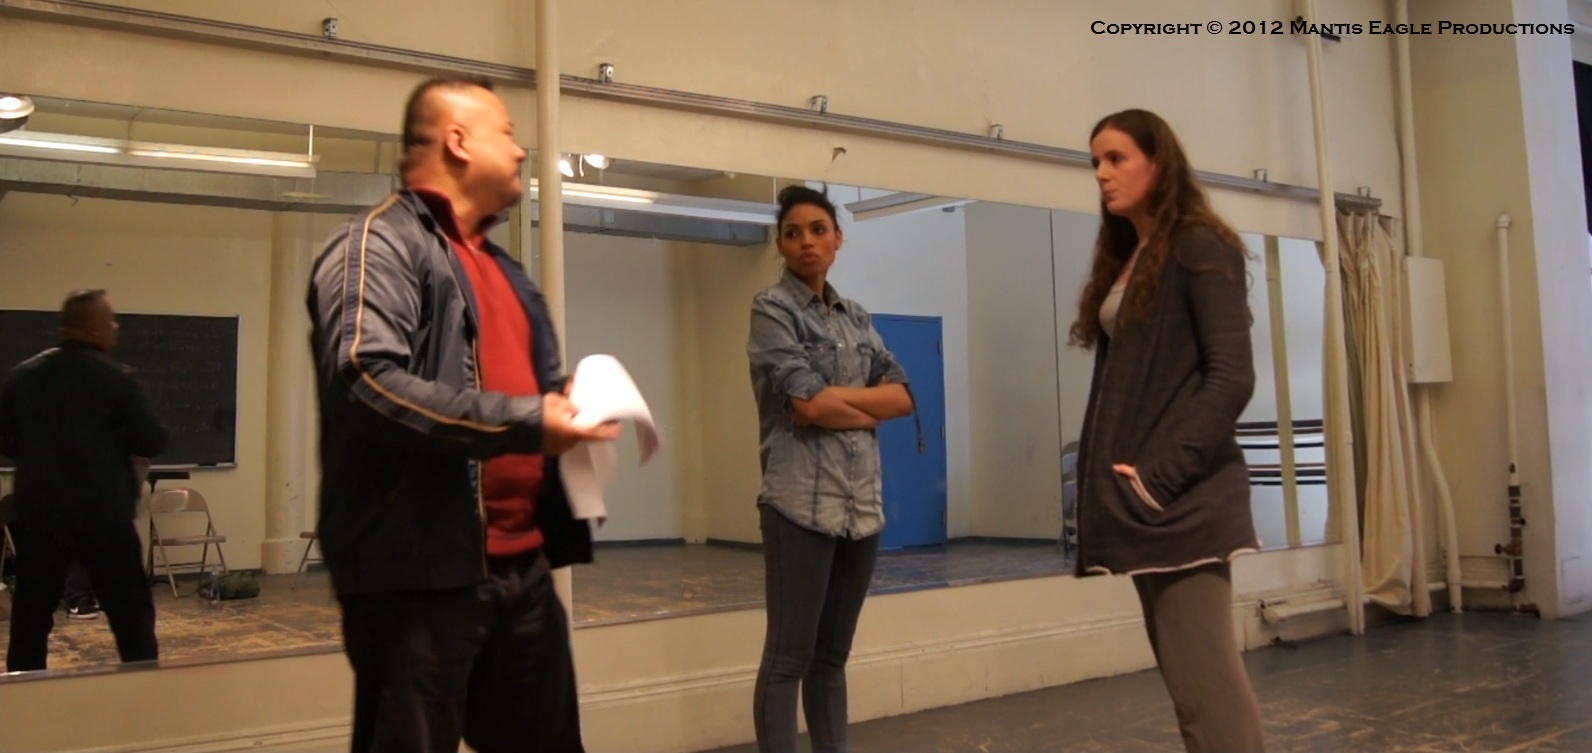 Director Joseph Villapaz with Gabrielle Ryan and Jenna Conroy during rehearsals.